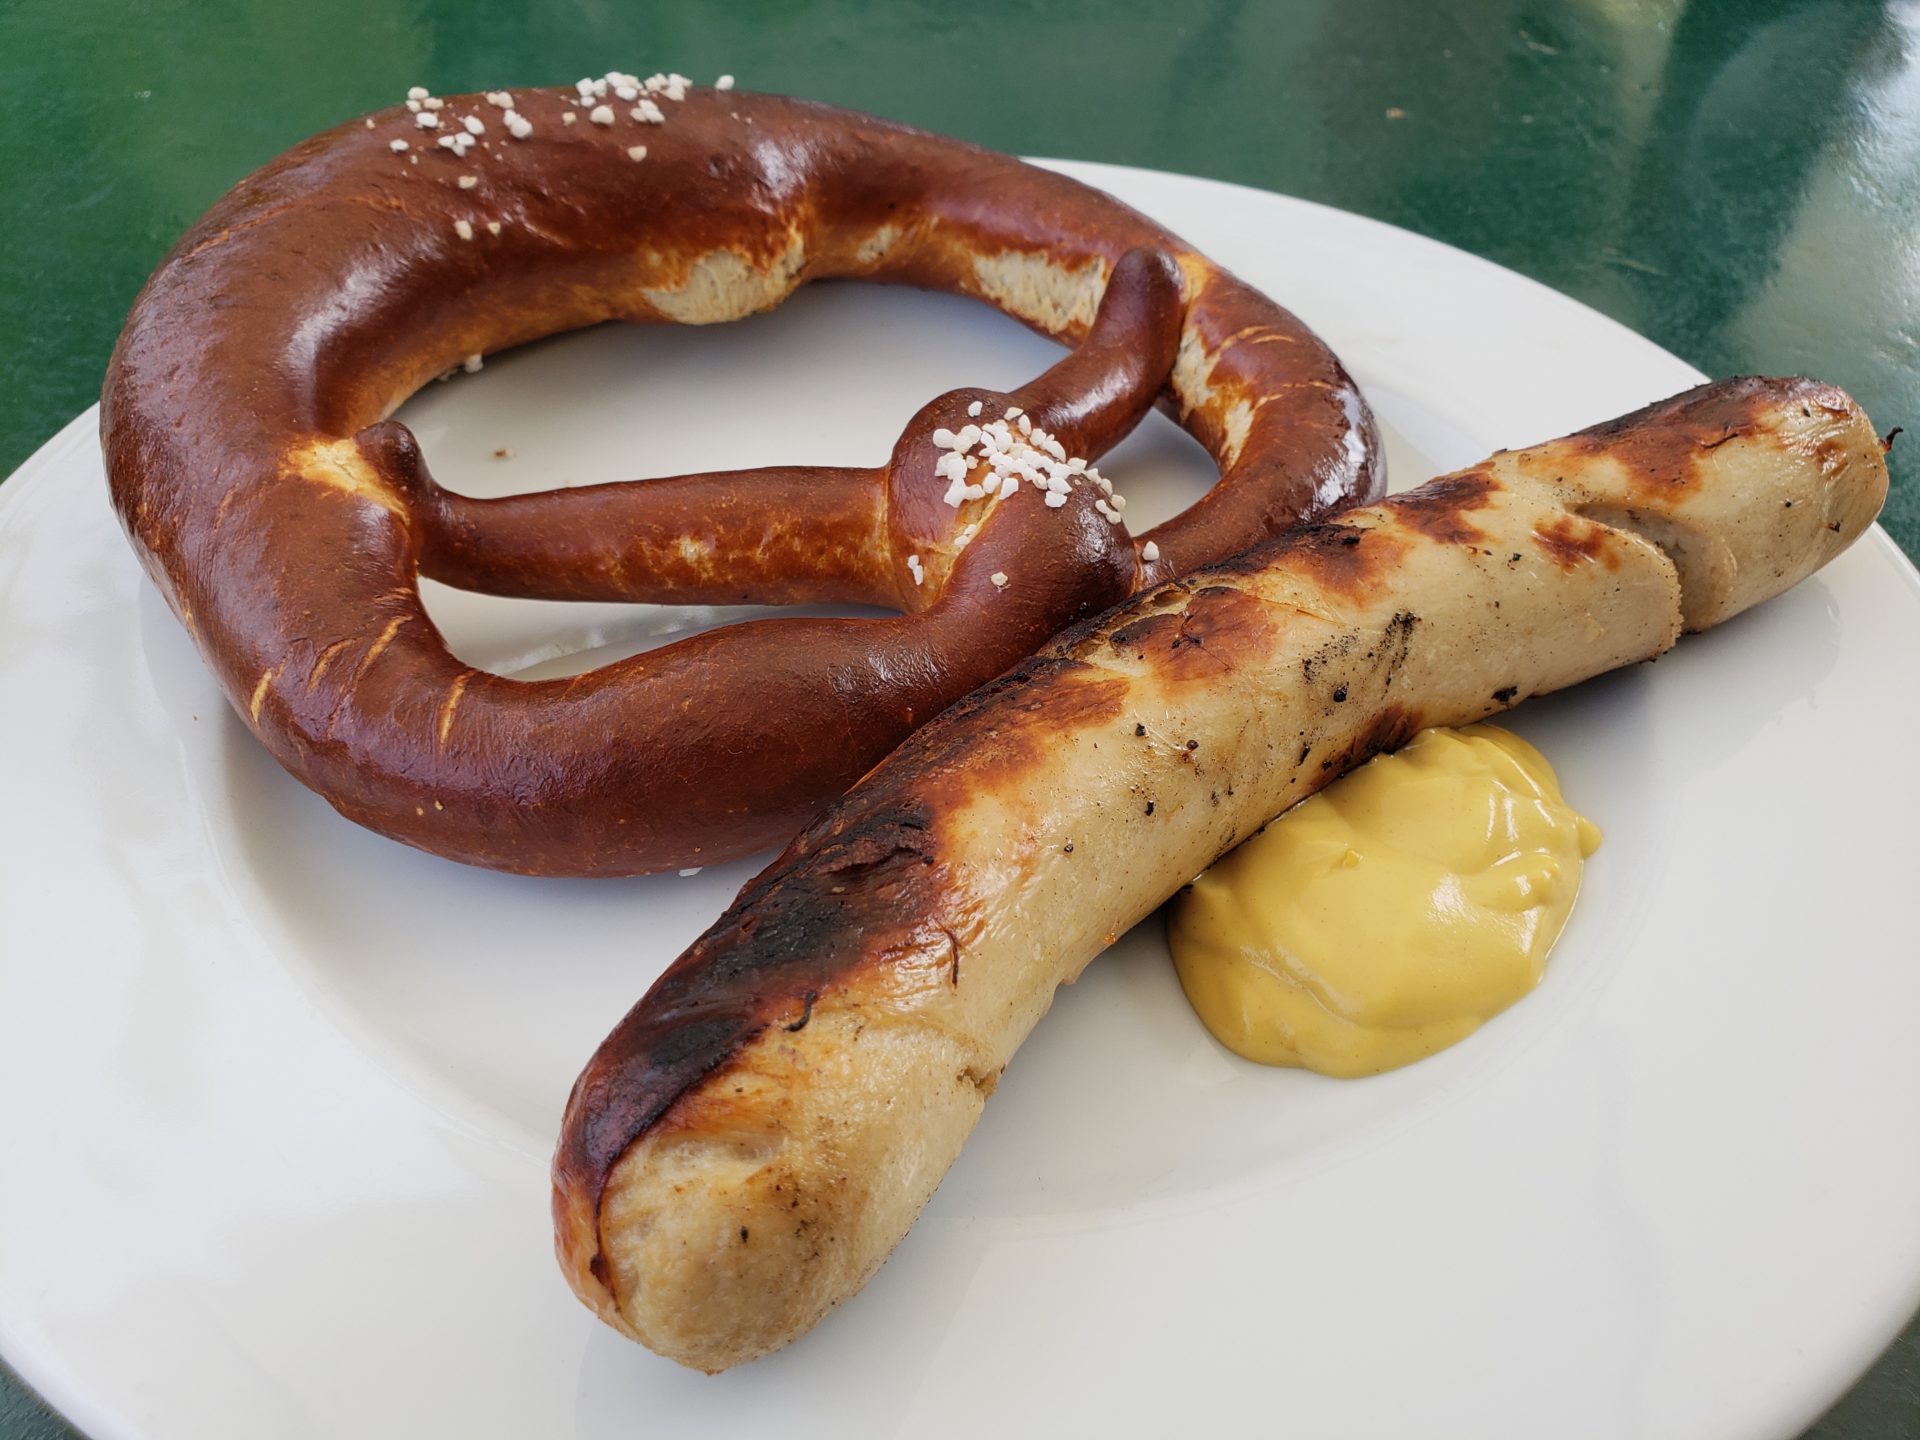 a sausage and pretzel on a plate